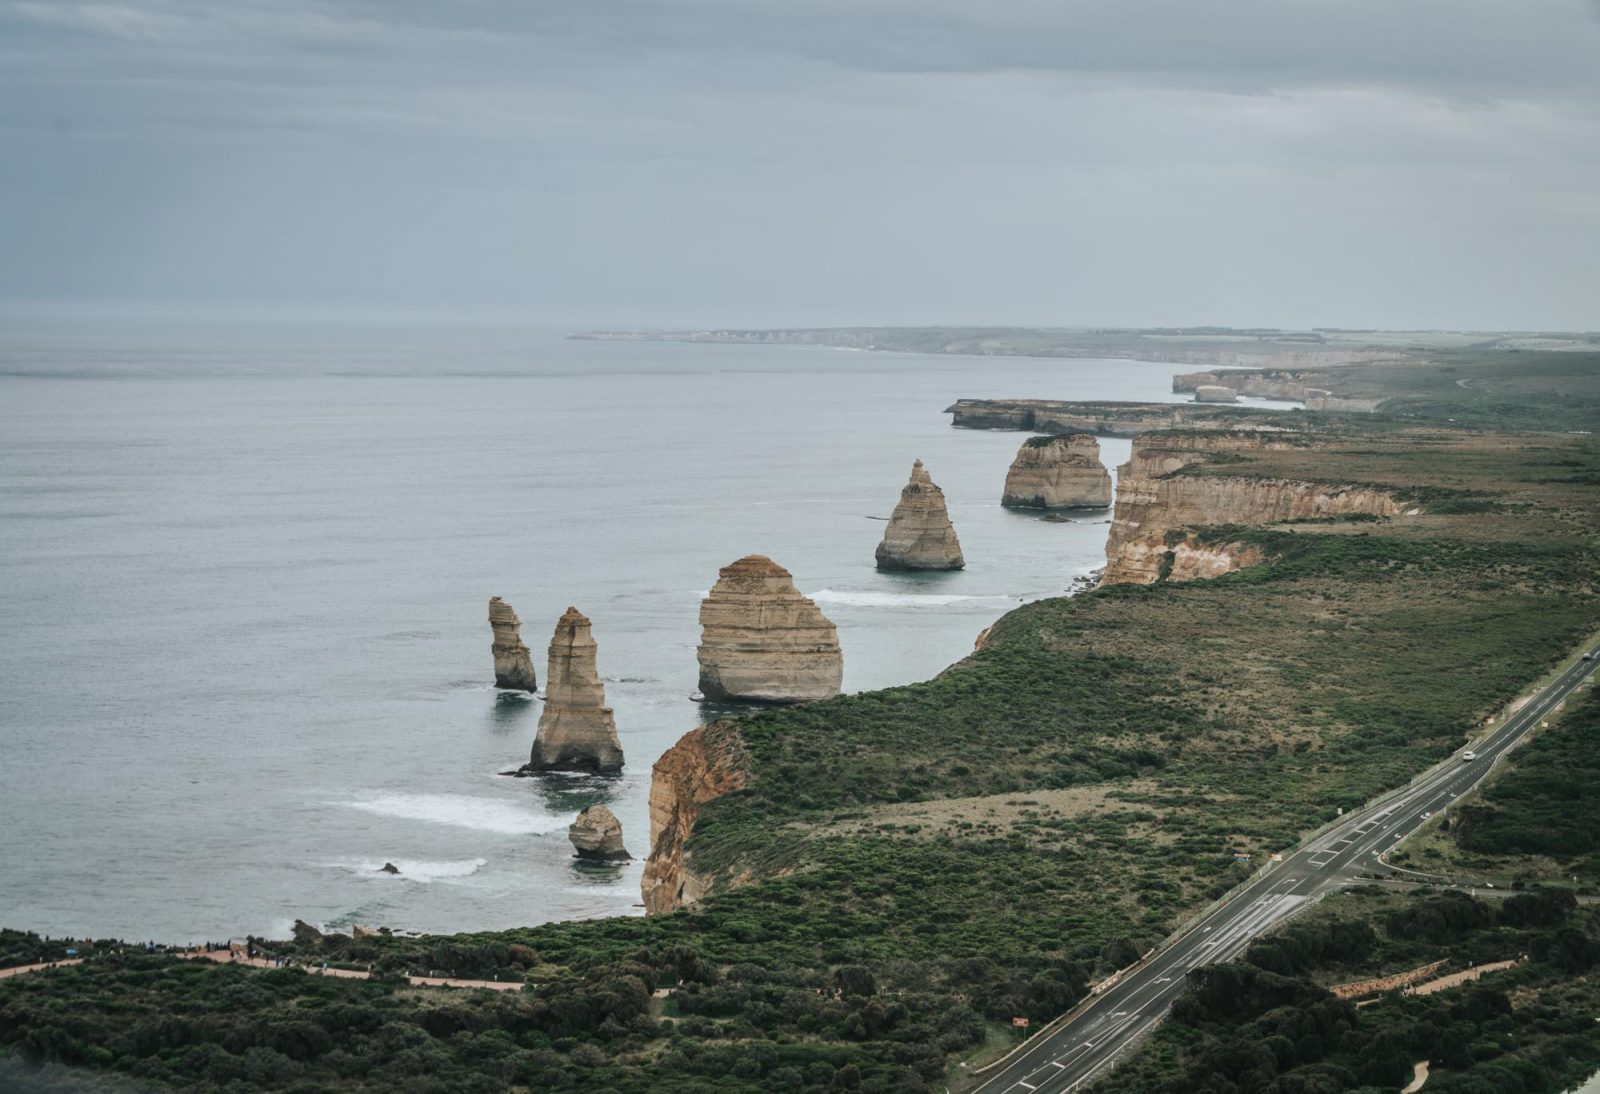 Admiring the Twelve Apostles from above!